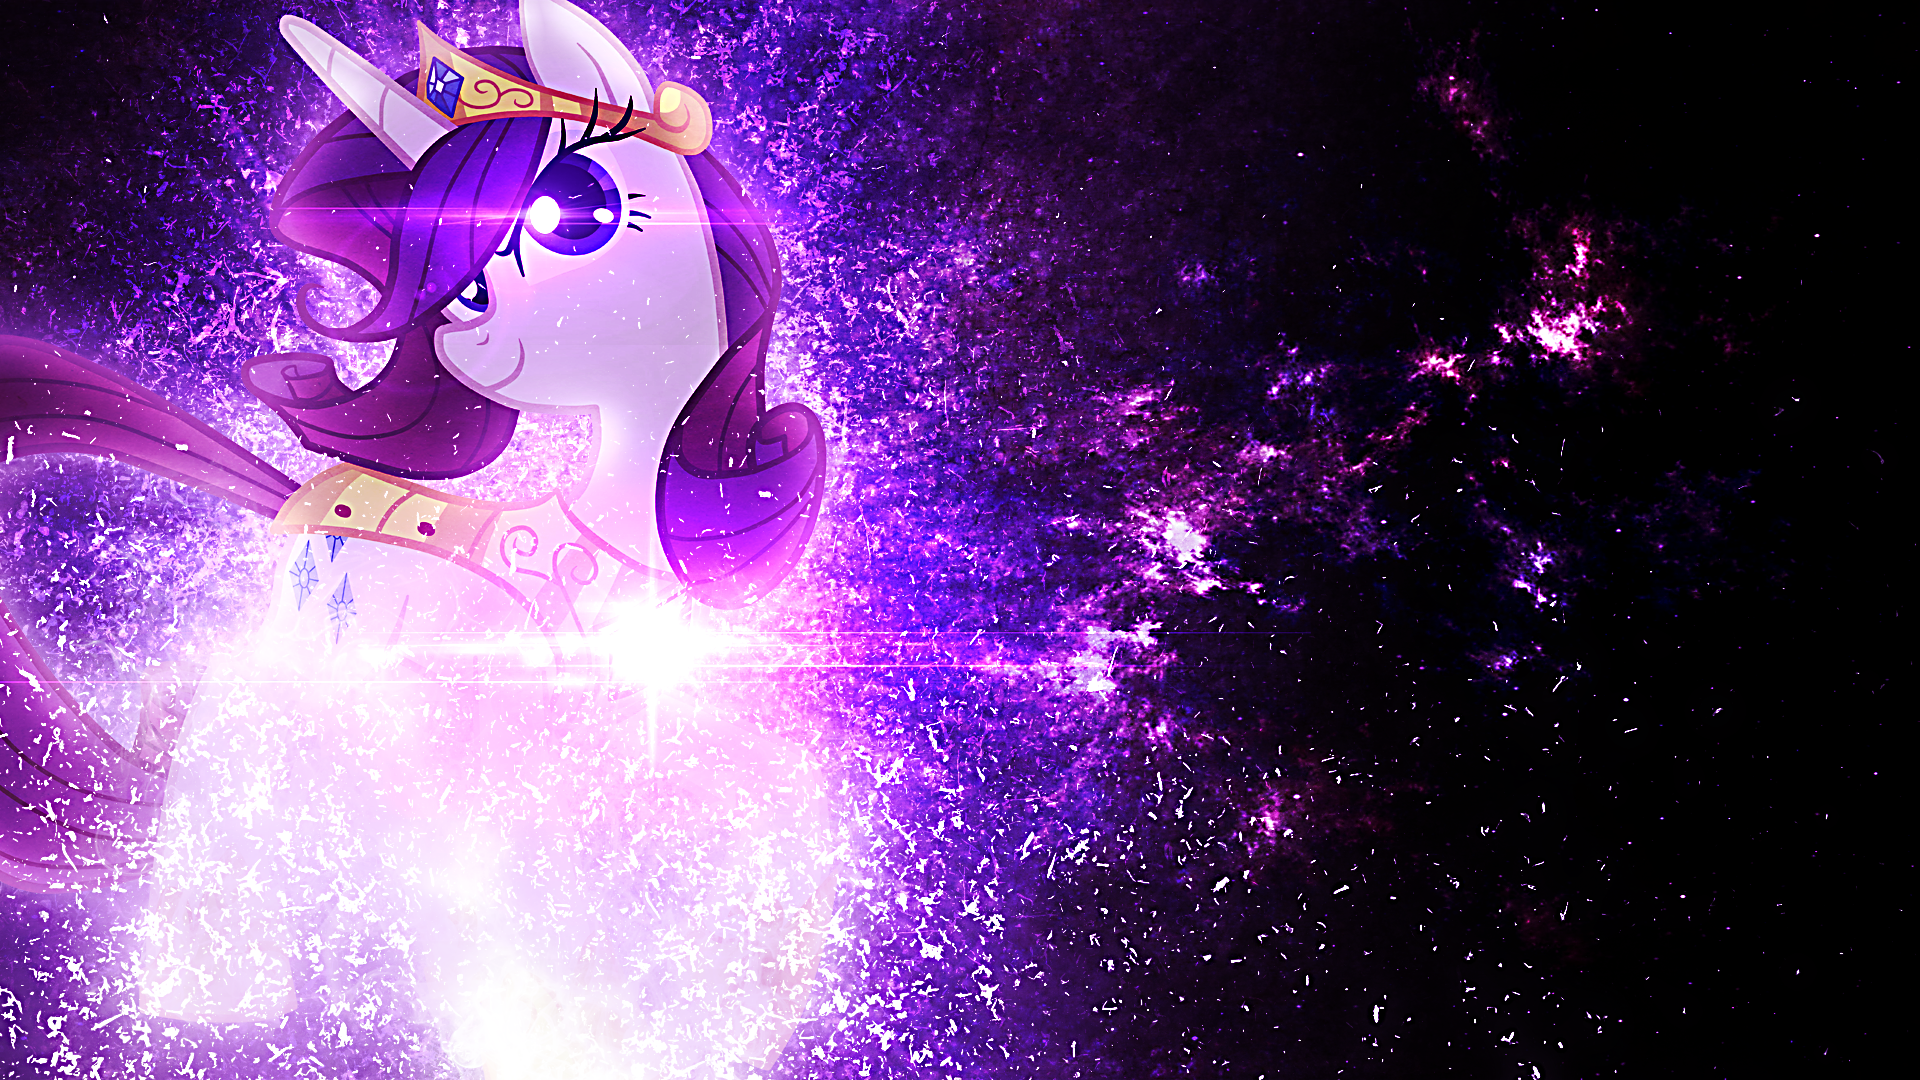 Rarity Guardian Of Generosity - Wallpaper by Equestria-Prevails, JennieOo and Tzolkine